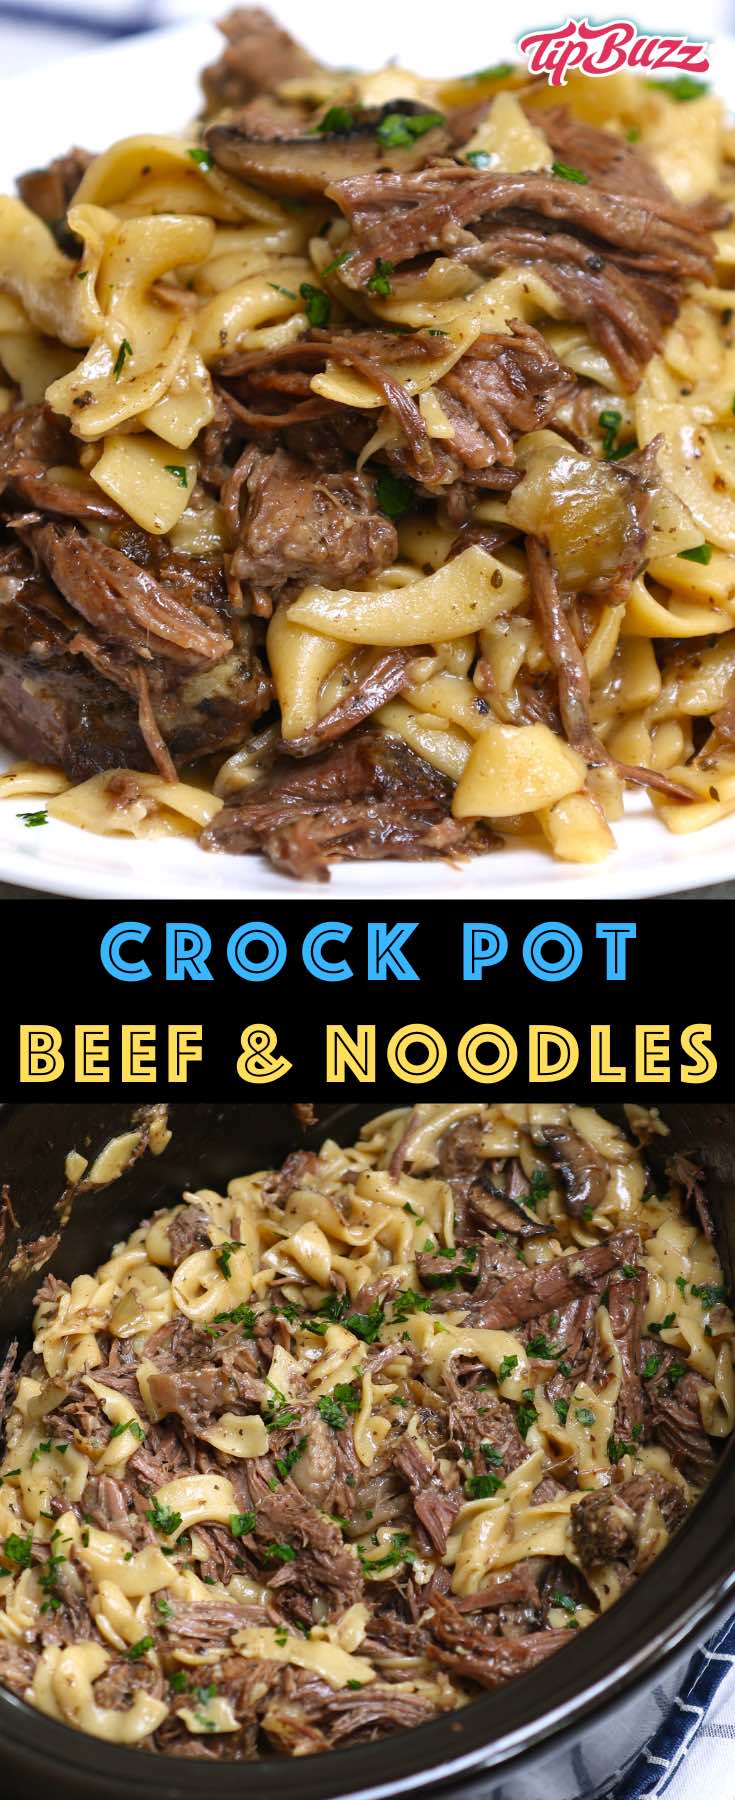 Beef and Noodles made in the crock pot for a delicious one-pot meal the entire family will love. This slow cooked comfort food only needs 15 minutes of prep! #beefandnoodles #beefnoodles